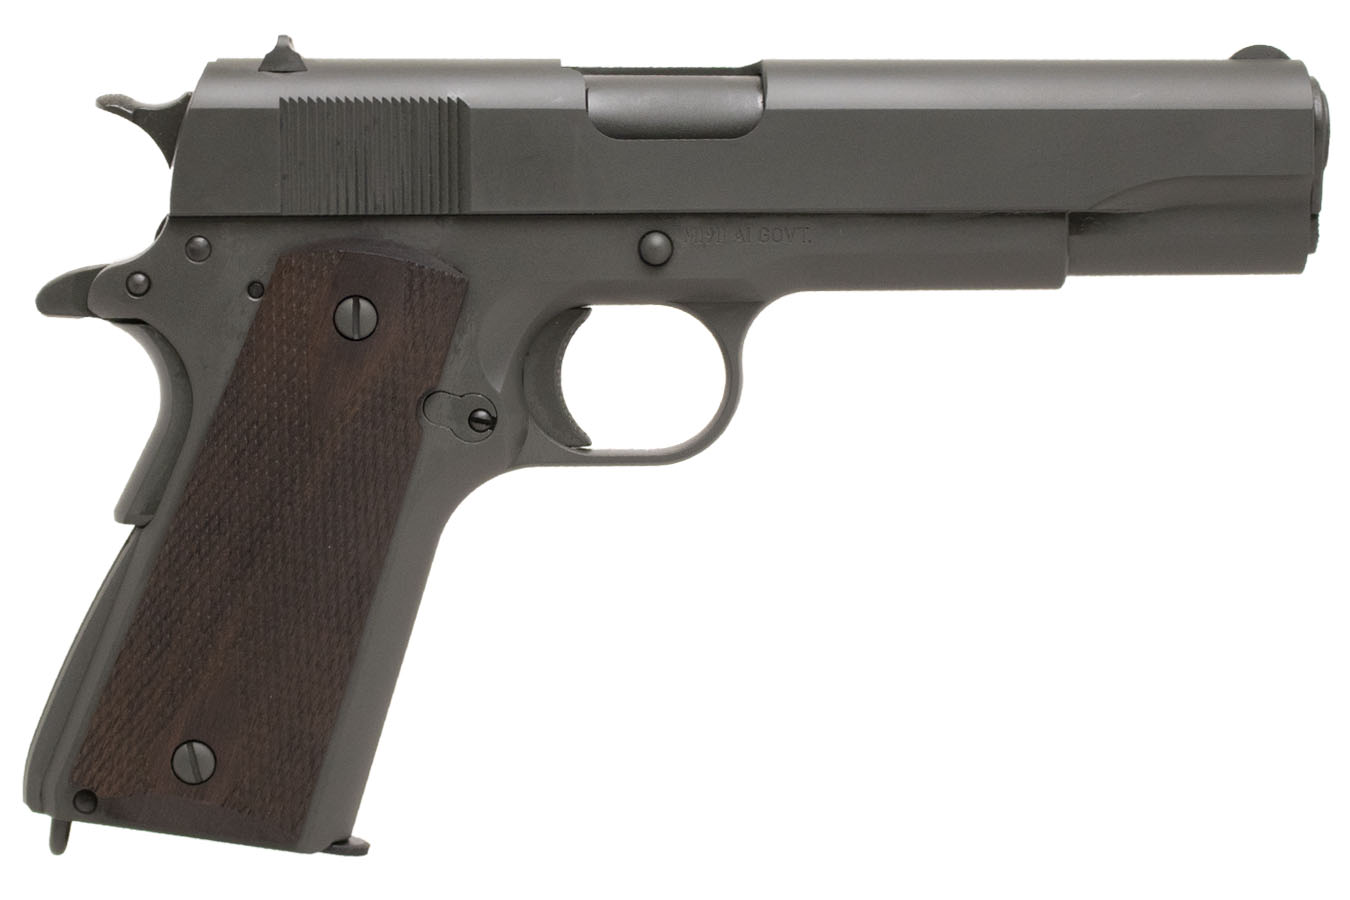 No. 31 Best Selling: TISAS 1911 GOVERNMENT 45 ACP 5 IN BBL PARKERIZED FINISH